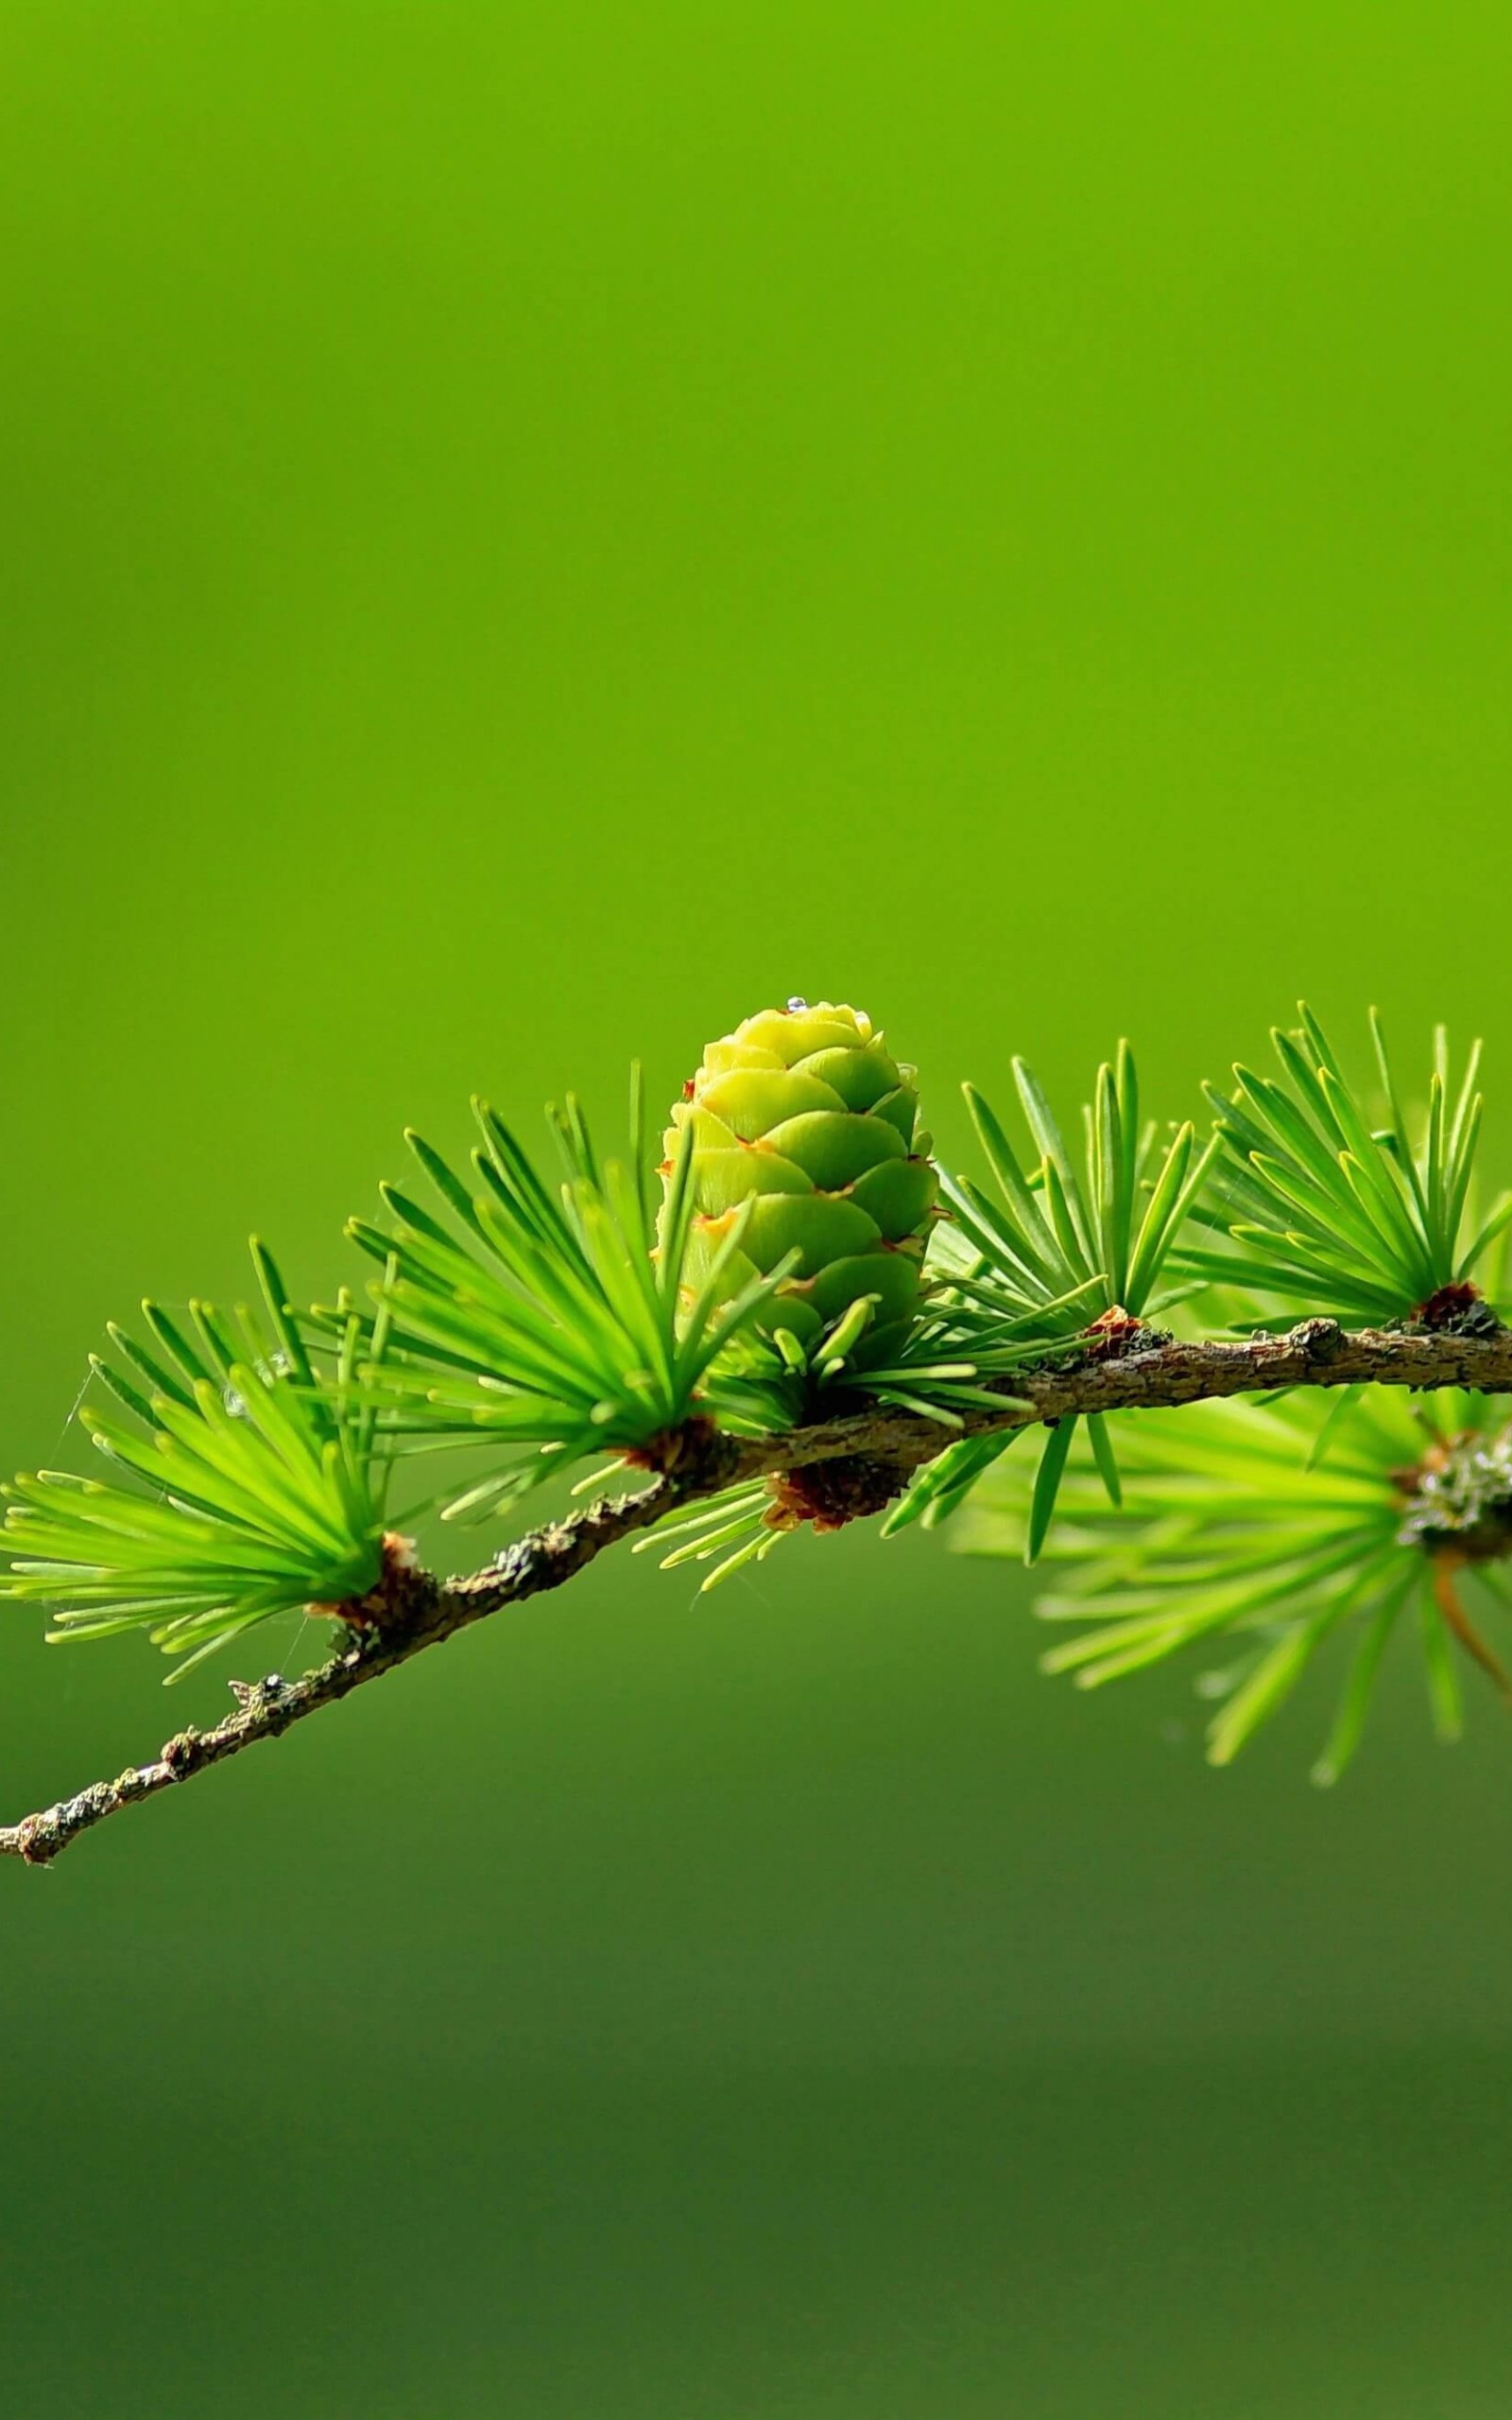 Branch of Pine Tree Wallpaper for Amazon Kindle Fire HDX 8.9